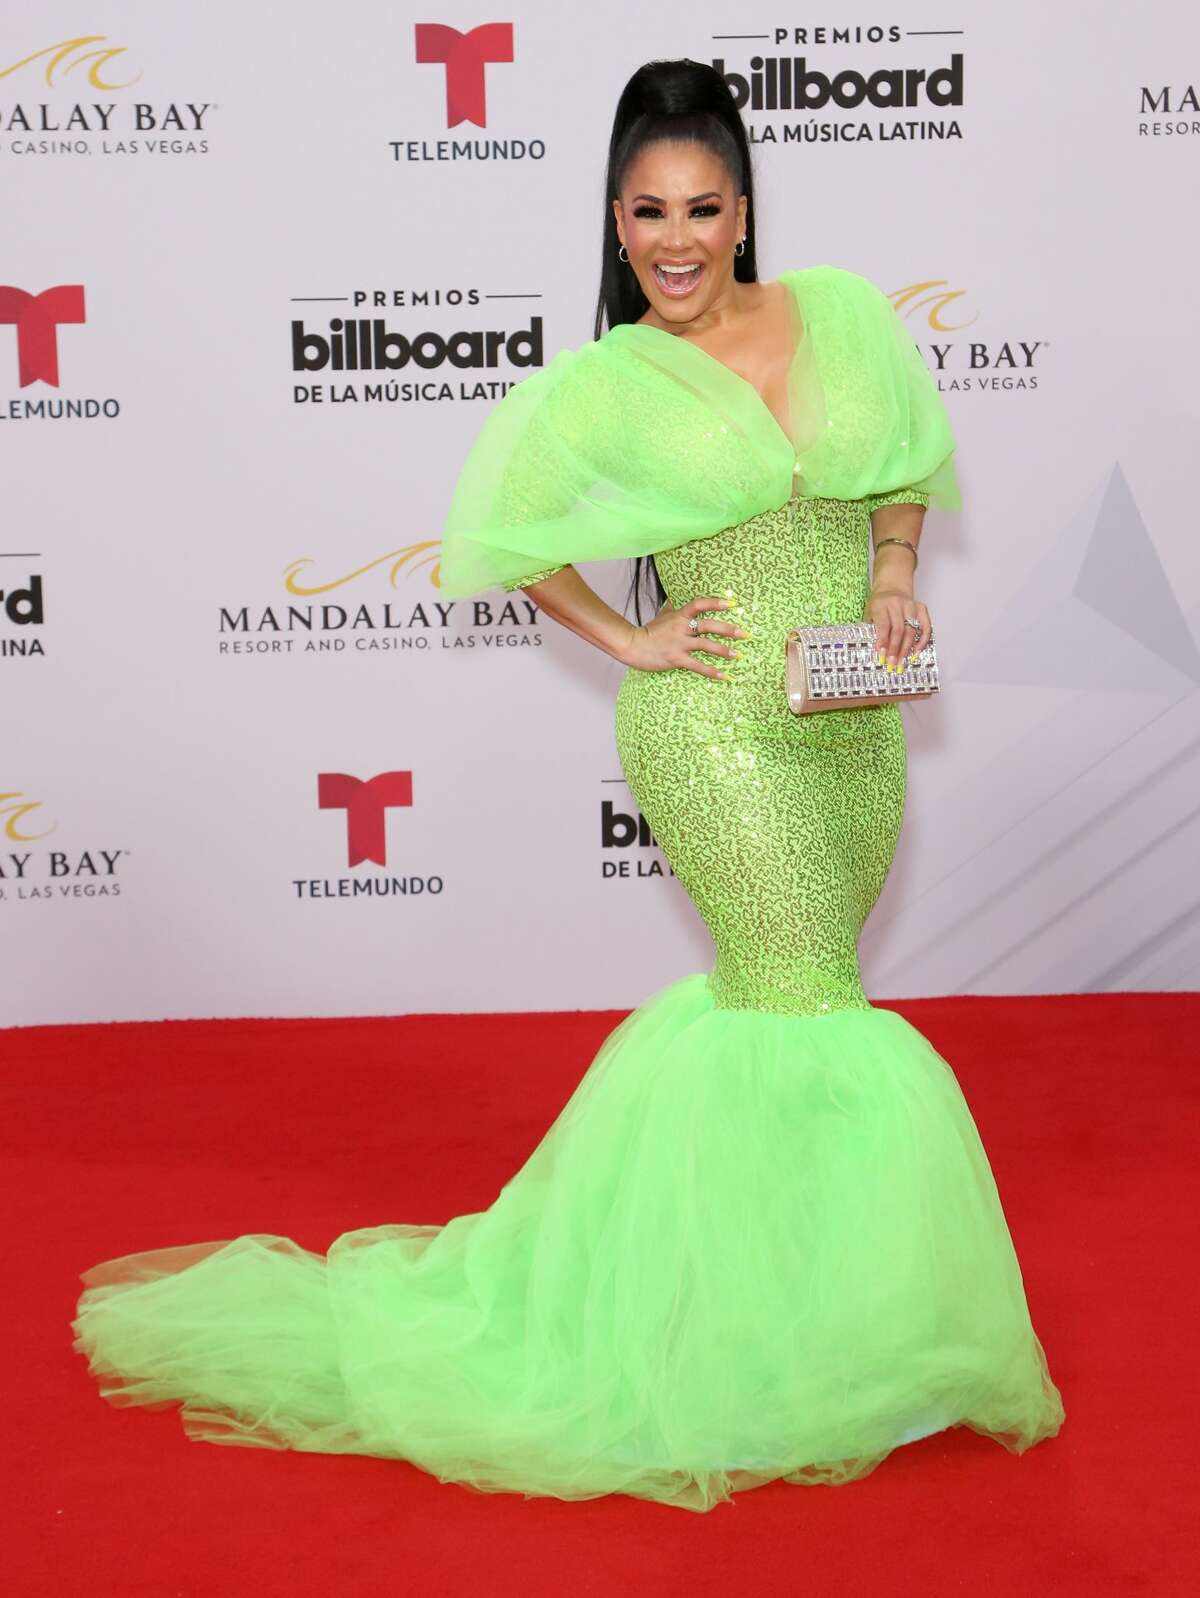 Journalist Carolina Sandoval attends the 2019 Billboard Latin Music Awards at the Mandalay Bay Events Center on April 25, 2019 in Las Vegas, Nevada. (Photo by Gabe Ginsberg/WireImage)